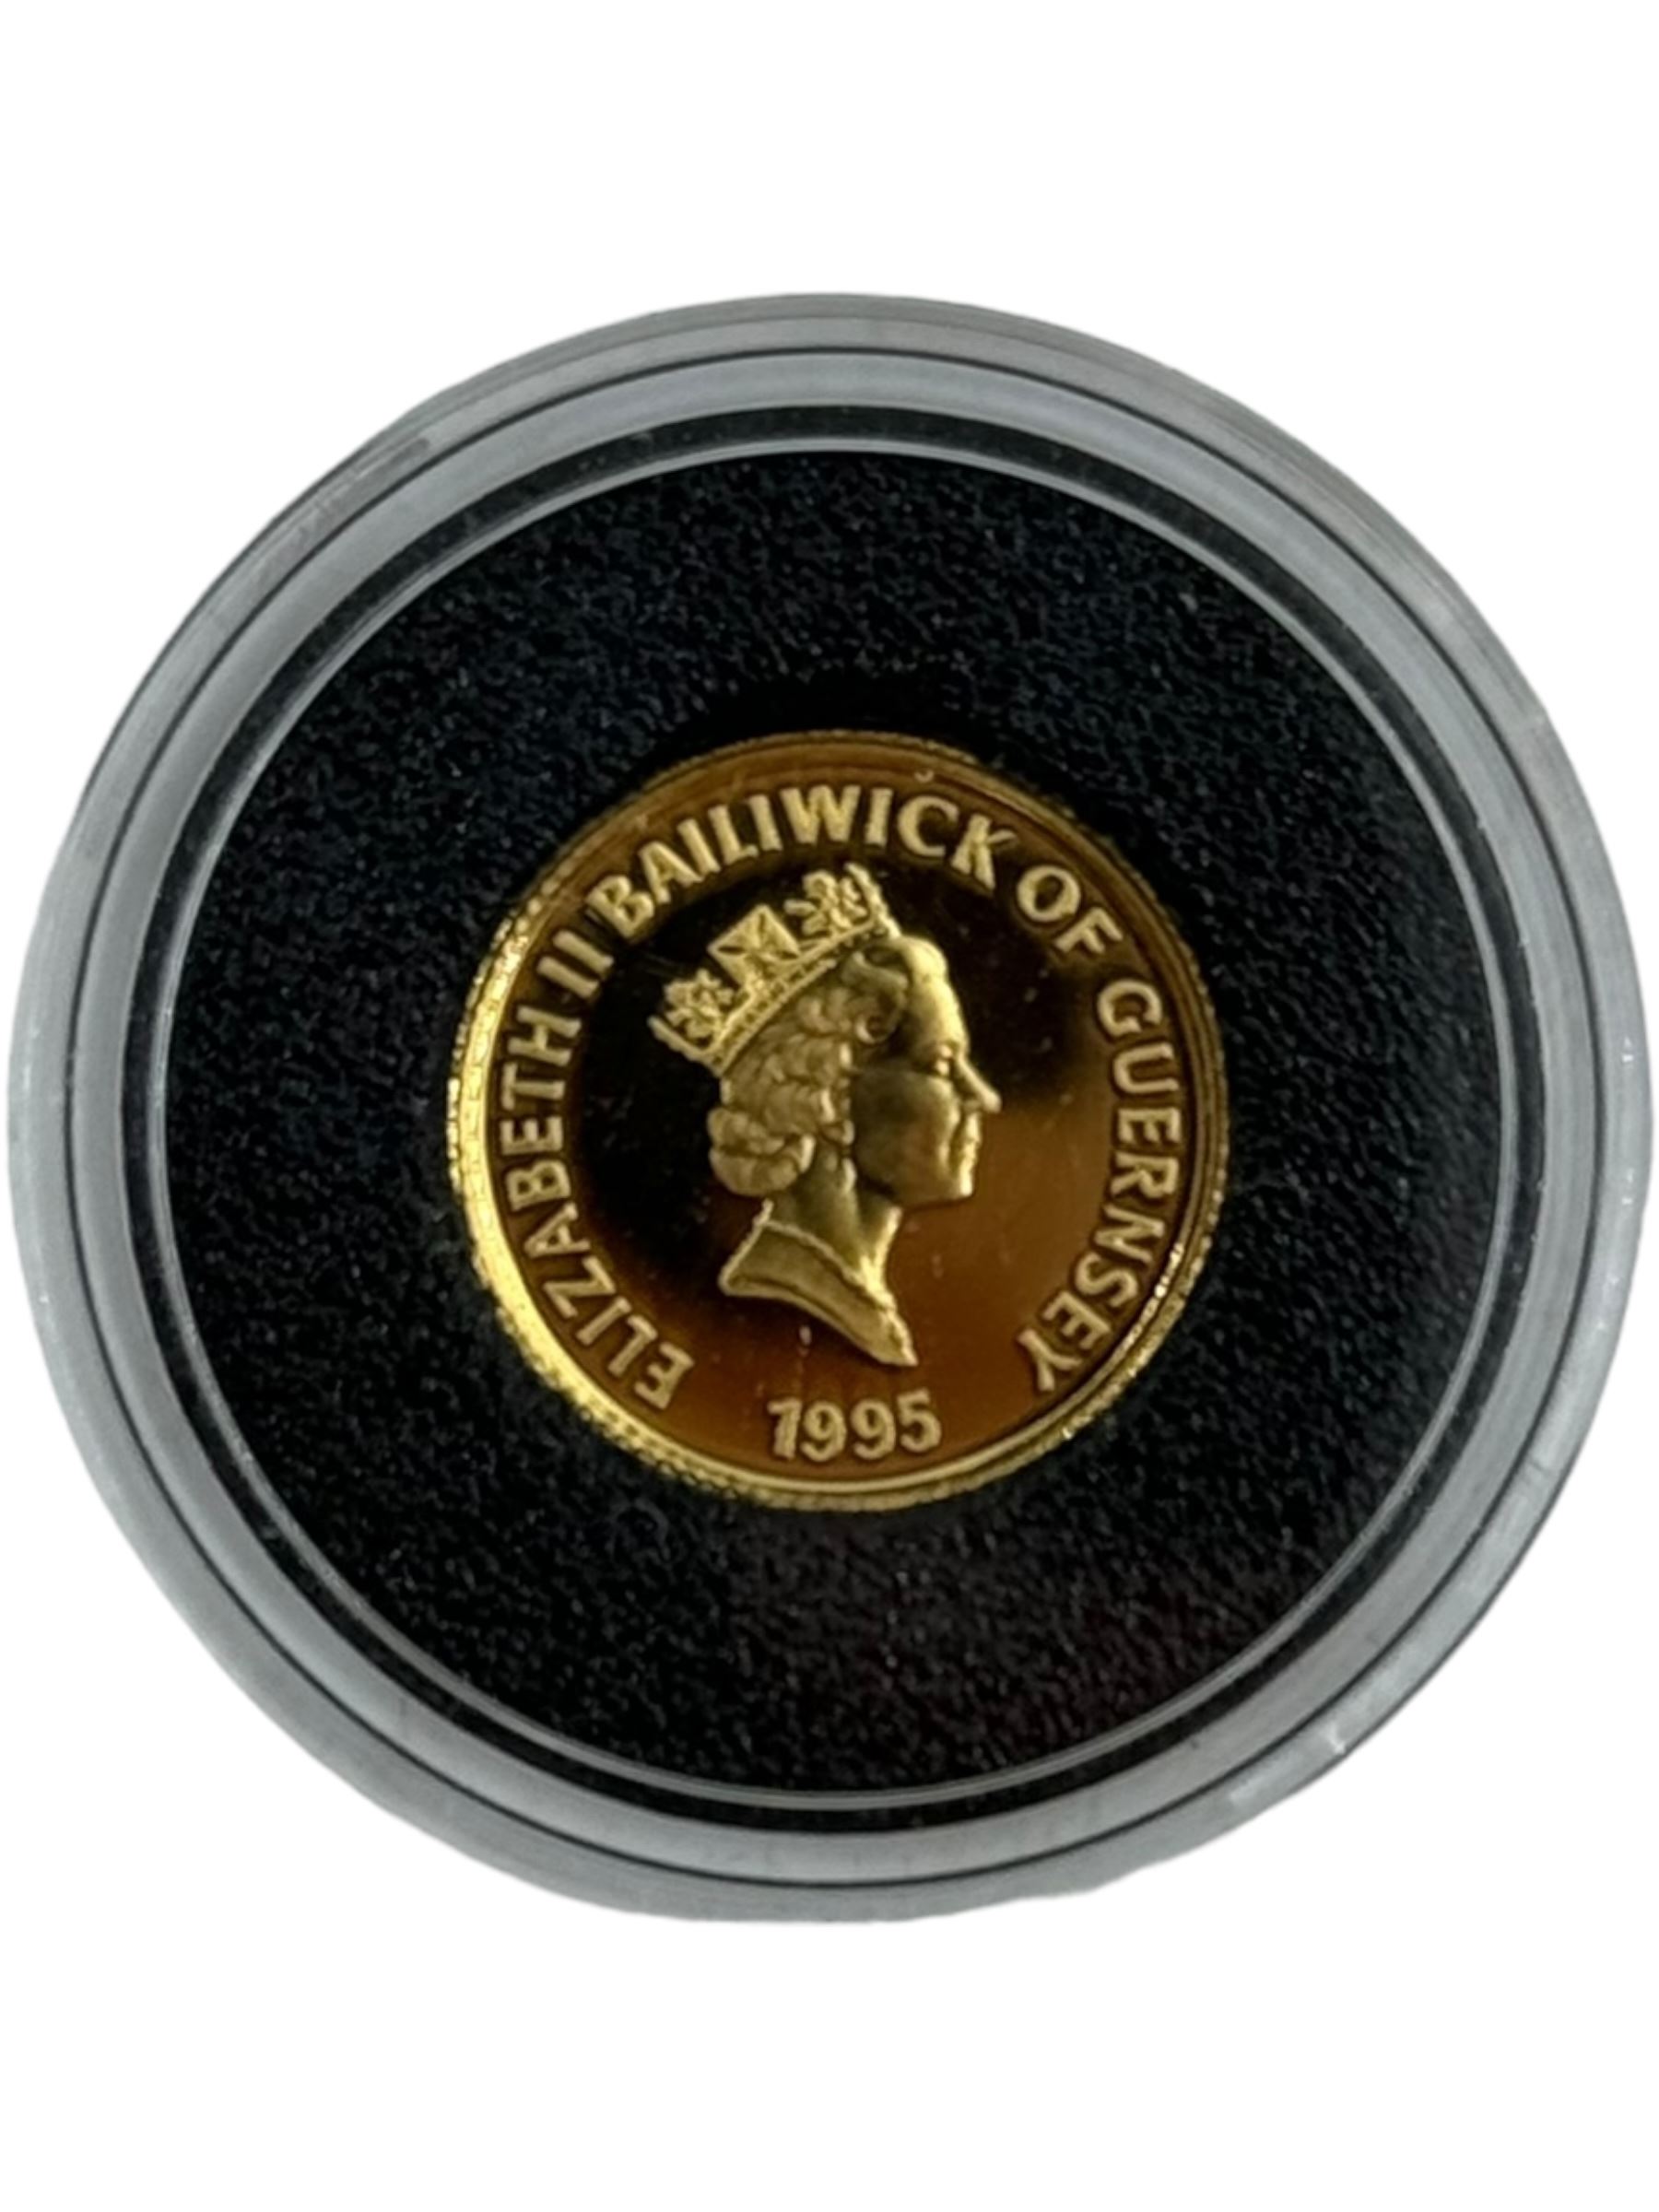 Four one twenty-fifth of an ounce 24 carat gold coins - Image 7 of 9